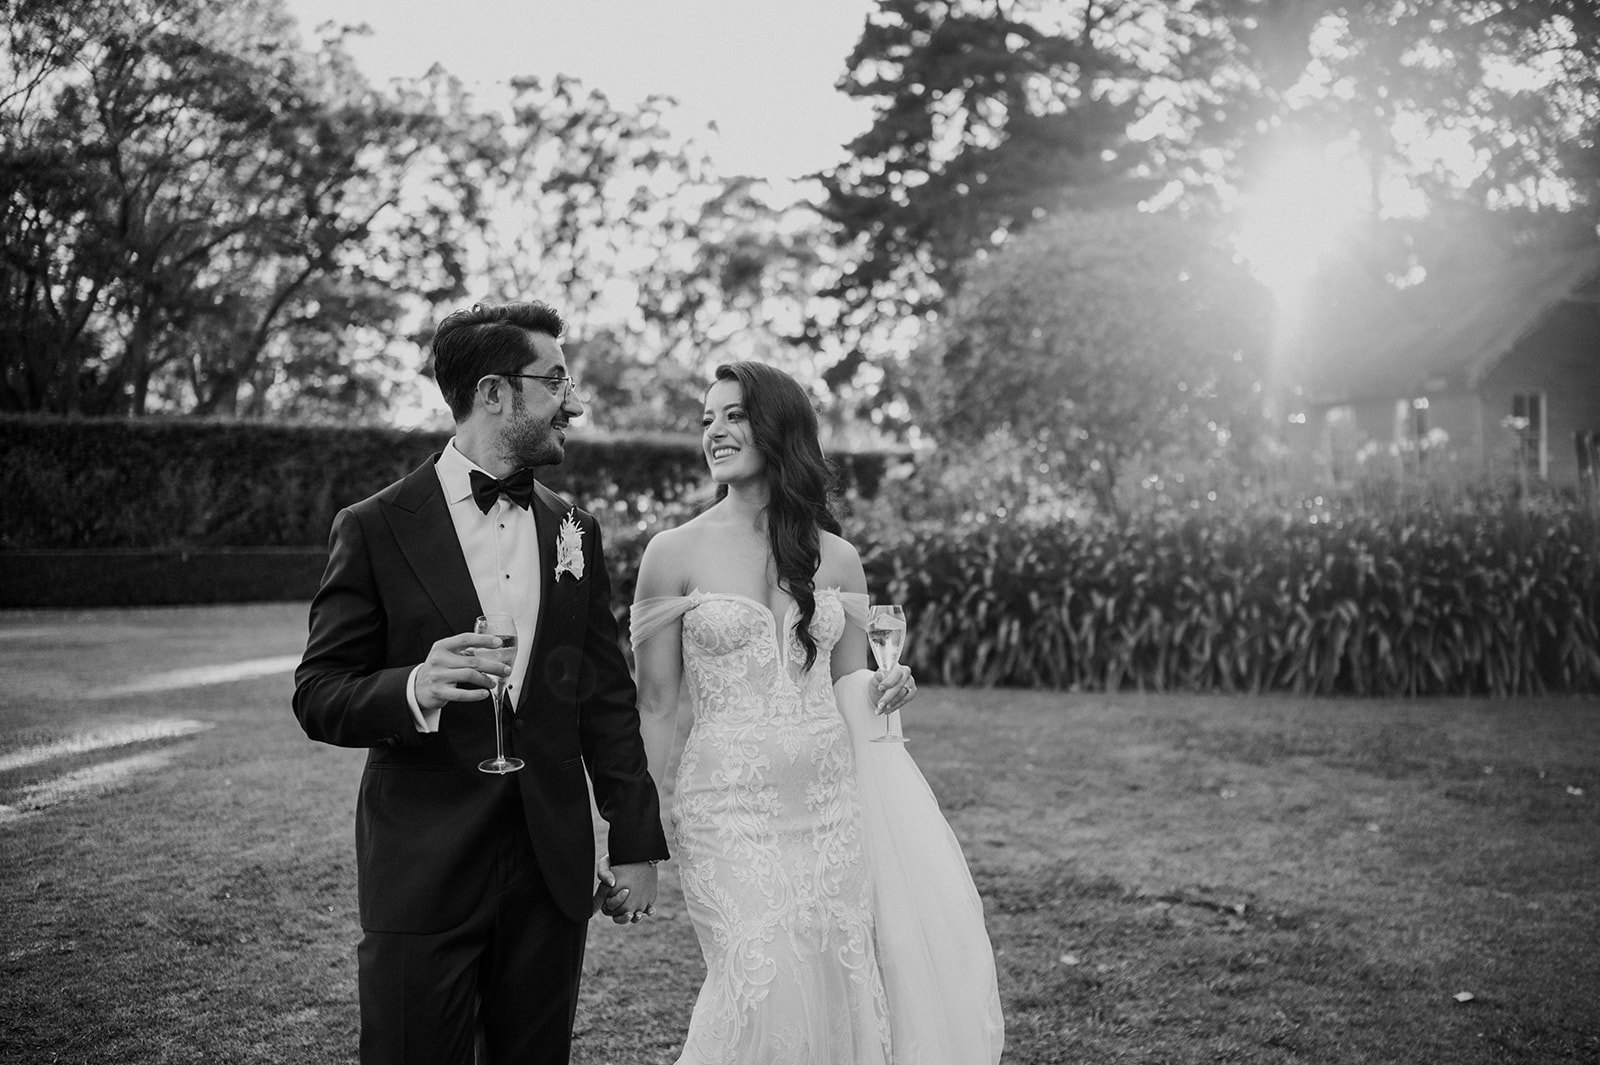 Bride and groom holding champagne glass walking through gardens